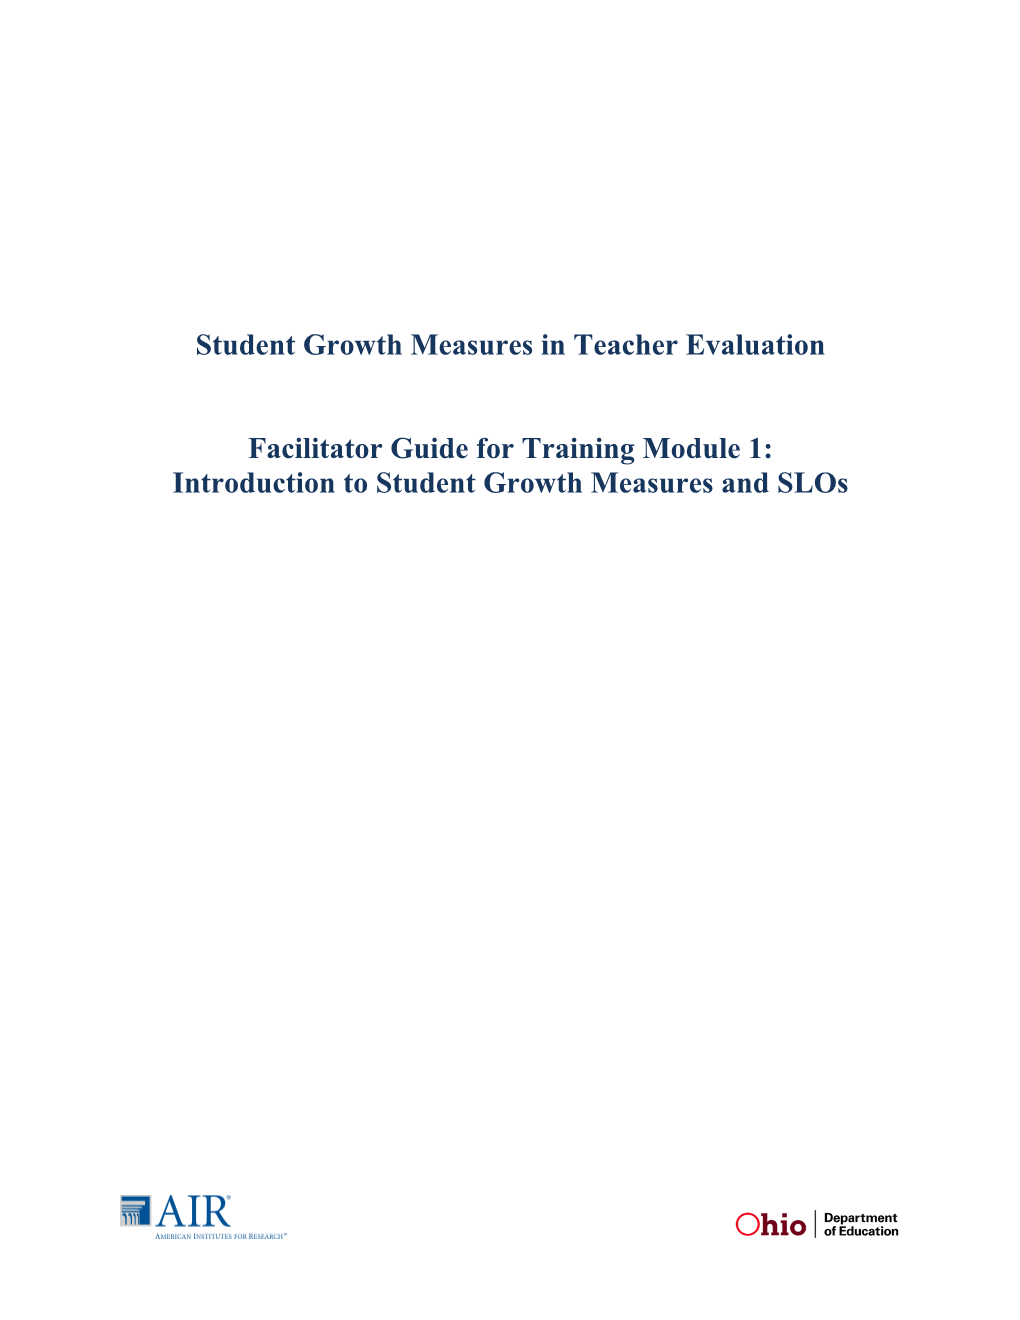 Student Growth Measures in Teacher Evaluation